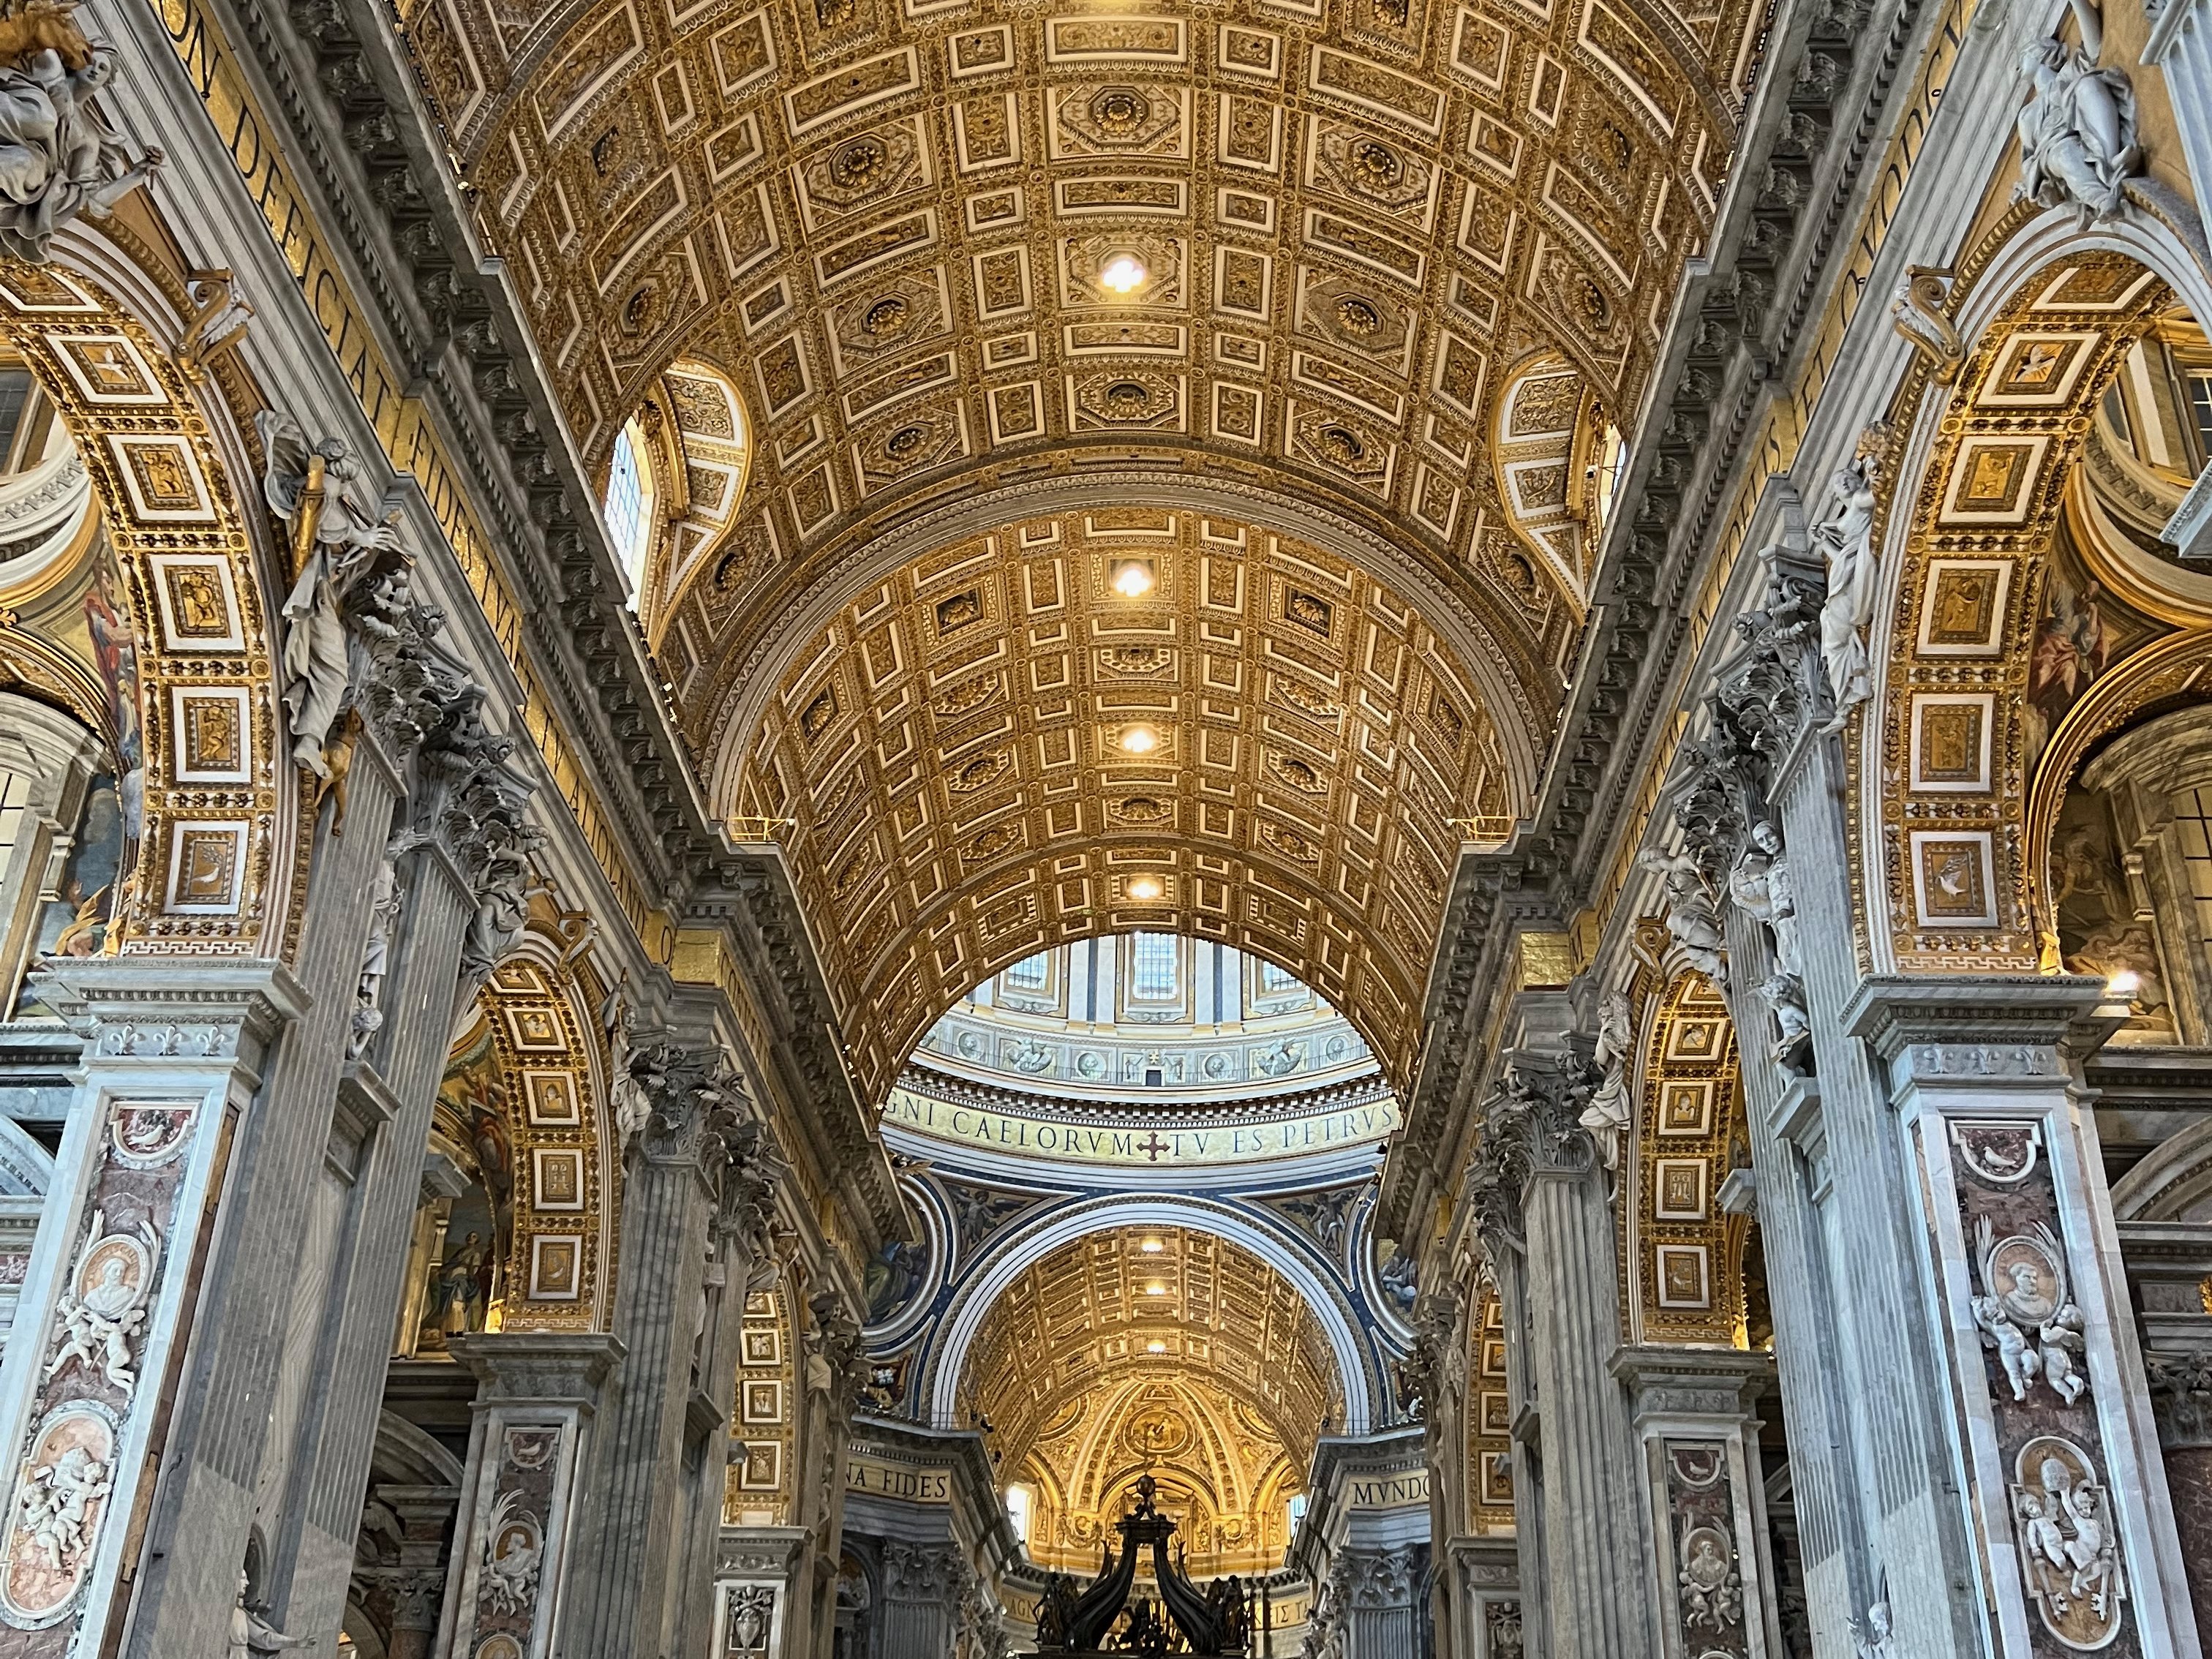 In St. Peter's Basilica